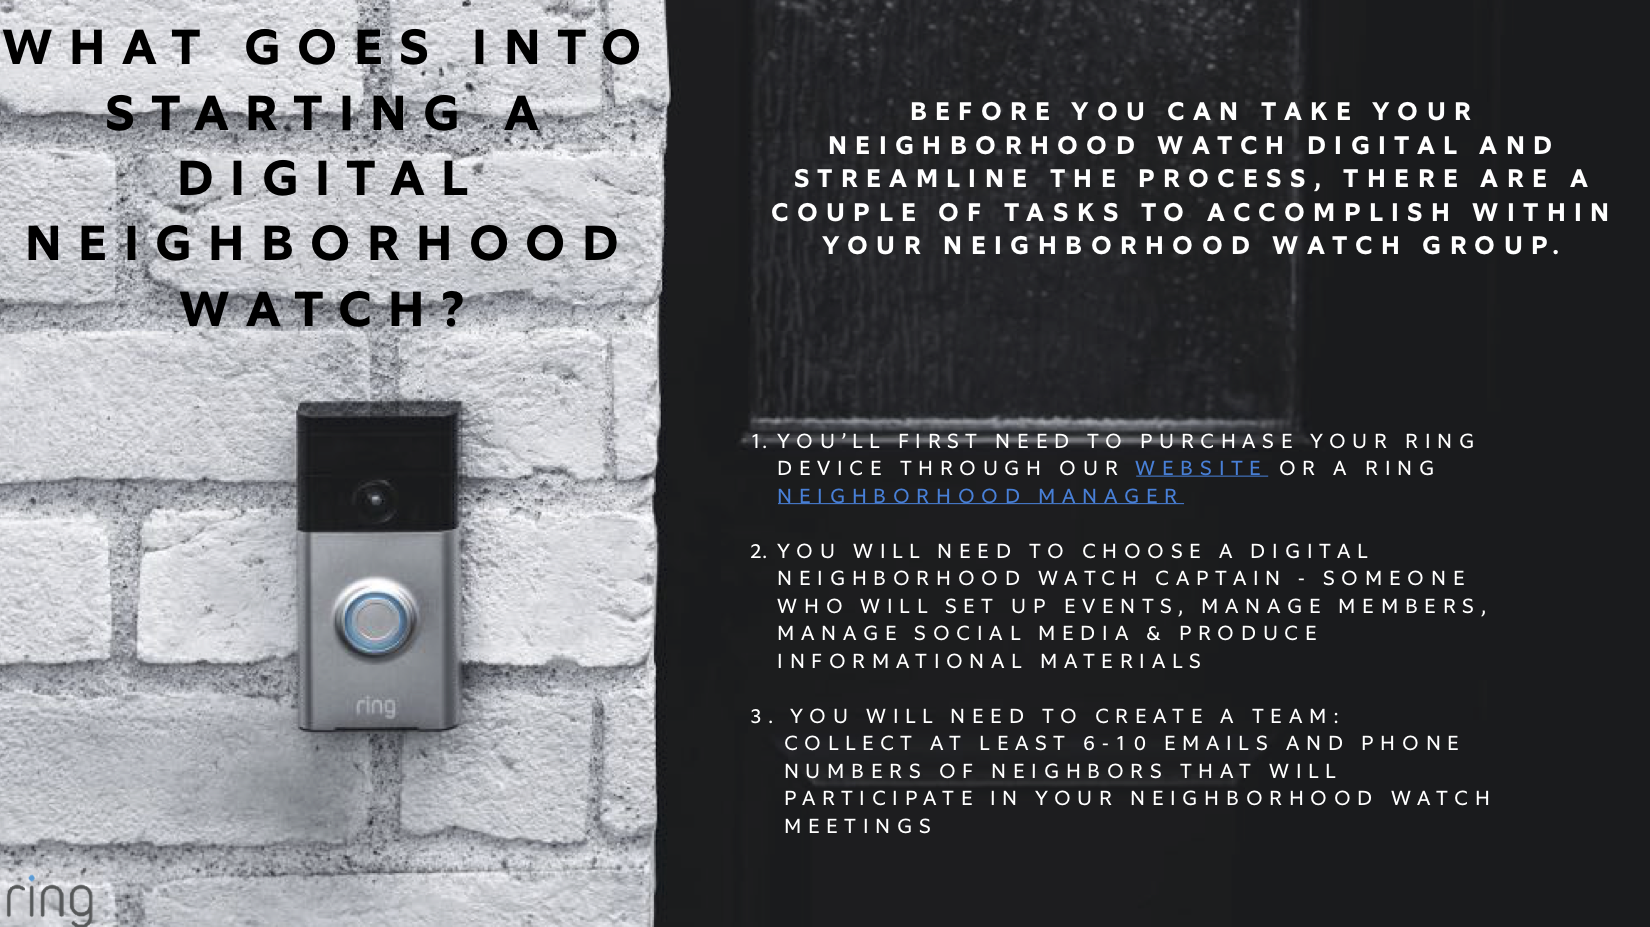 Image: Slide 5 of the Digital Neighborhood Watch document obtained by Motherboard.